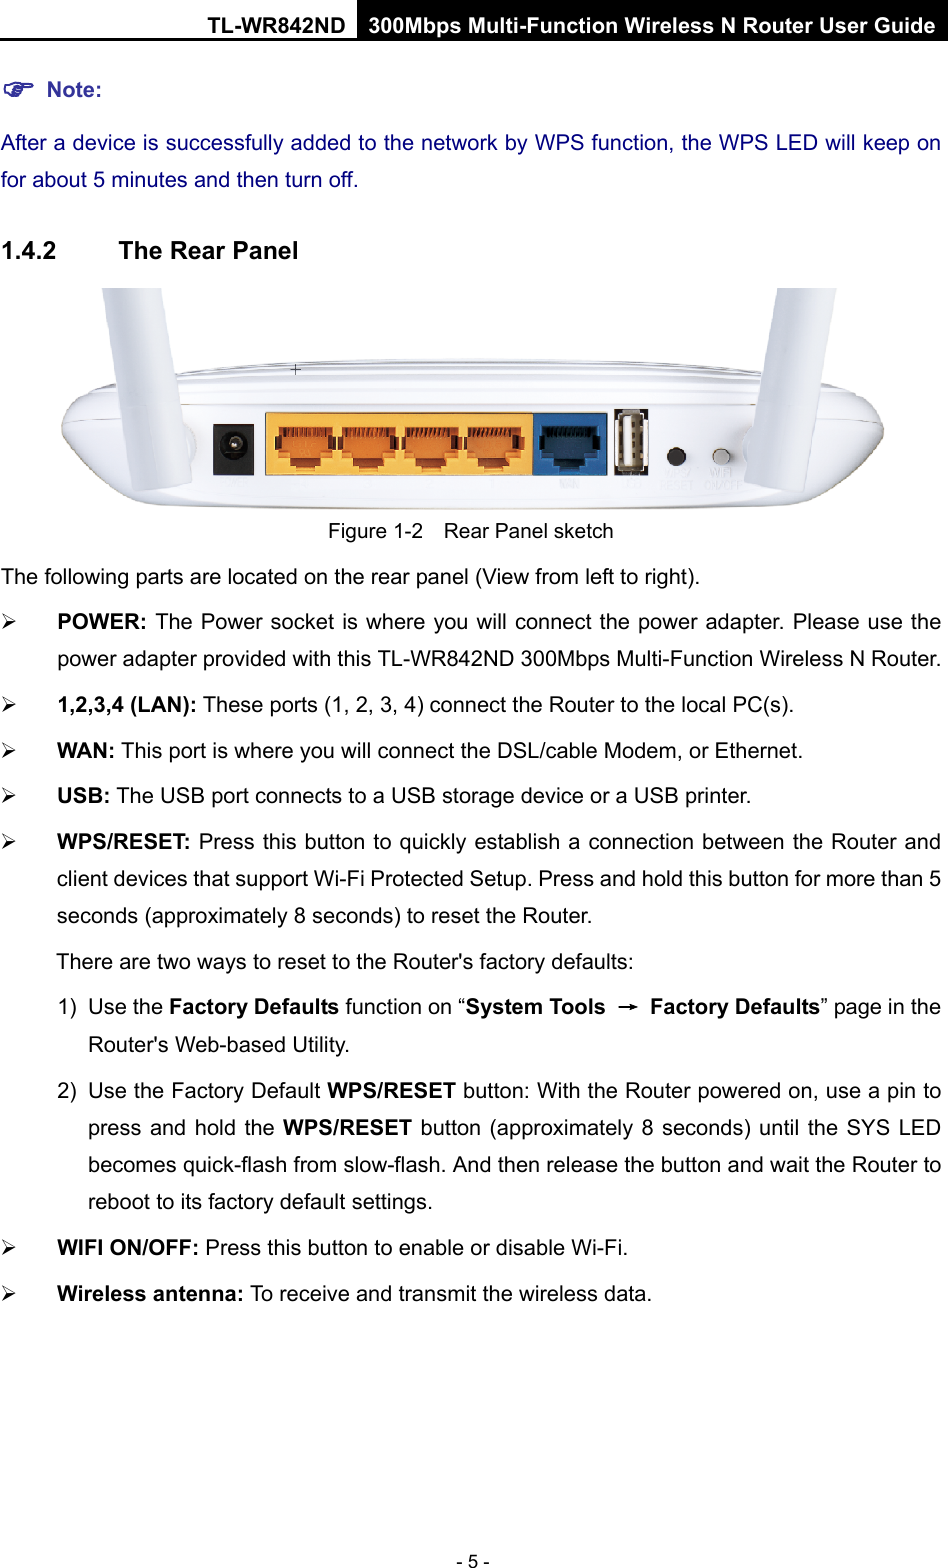 TL-WR842ND 300Mbps Multi-Function Wireless N Router User Guide  - 5 -  Note: After a device is successfully added to the network by WPS function, the WPS LED will keep on for about 5 minutes and then turn off.   1.4.2 The Rear Panel  Figure 1-2    Rear Panel sketch The following parts are located on the rear panel (View from left to right).  POWER: The Power socket is where you will connect the power adapter. Please use the power adapter provided with this TL-WR842ND 300Mbps Multi-Function Wireless N Router.  1,2,3,4 (LAN): These ports (1, 2, 3, 4) connect the Router to the local PC(s).  WAN: This port is where you will connect the DSL/cable Modem, or Ethernet.  USB: The USB port connects to a USB storage device or a USB printer.  WPS/RESET: Press this button to quickly establish a connection between the Router and client devices that support Wi-Fi Protected Setup. Press and hold this button for more than 5 seconds (approximately 8 seconds) to reset the Router.   There are two ways to reset to the Router&apos;s factory defaults: 1) Use the Factory Defaults function on “System Tools → Factory Defaults” page in the Router&apos;s Web-based Utility. 2) Use the Factory Default WPS/RESET button: With the Router powered on, use a pin to press and hold the WPS/RESET button (approximately 8 seconds) until the SYS LED becomes quick-flash from slow-flash. And then release the button and wait the Router to reboot to its factory default settings.  WIFI ON/OFF: Press this button to enable or disable Wi-Fi.  Wireless antenna: To receive and transmit the wireless data. 